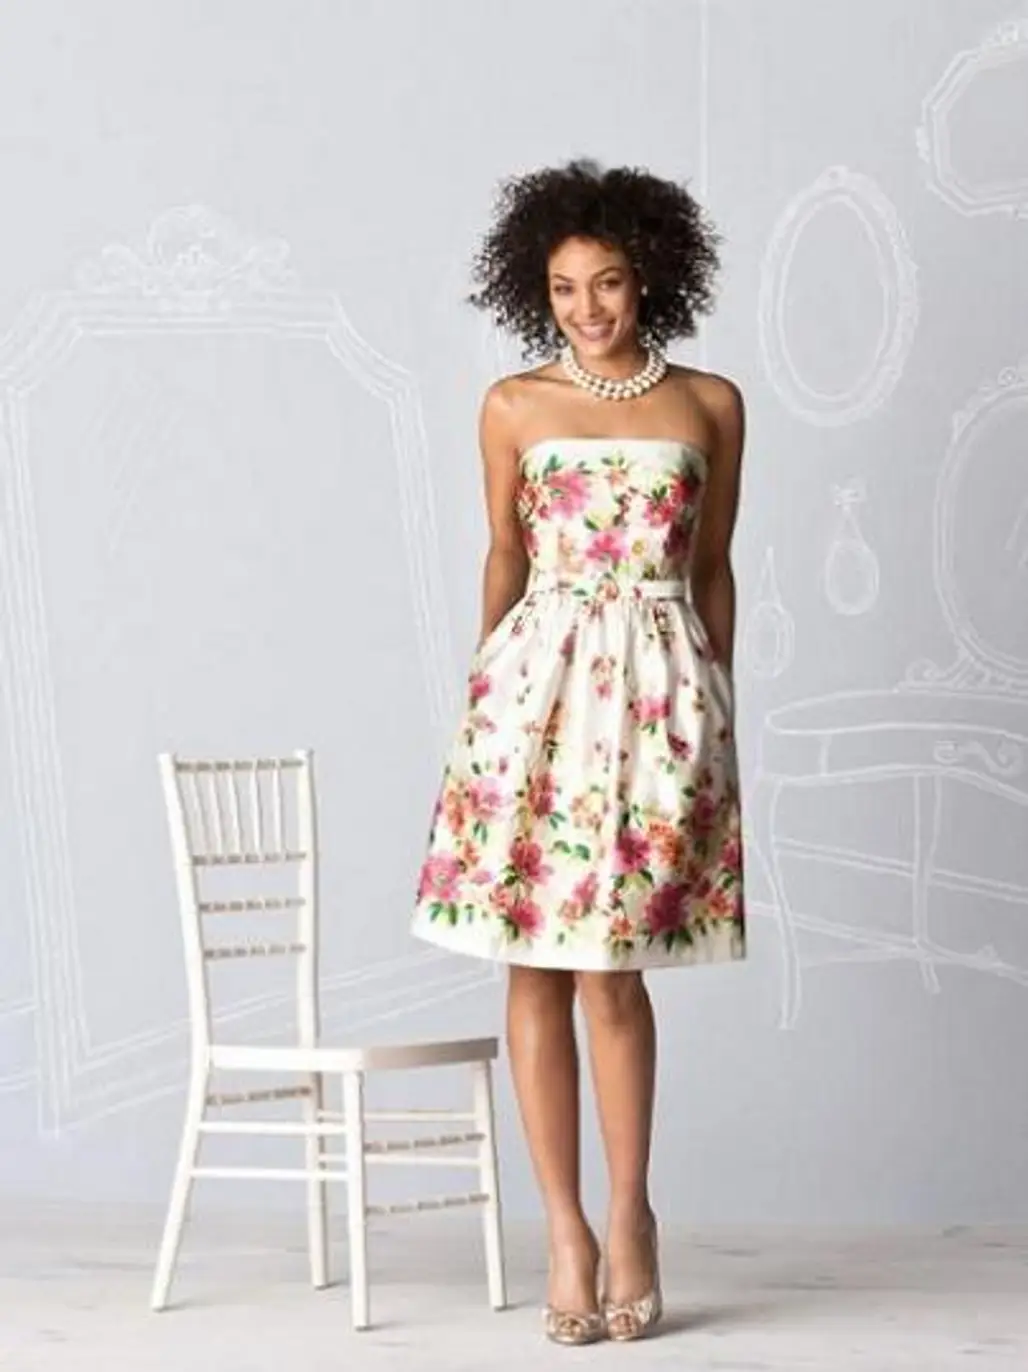 April Showers Bring Dresses with Flowers...